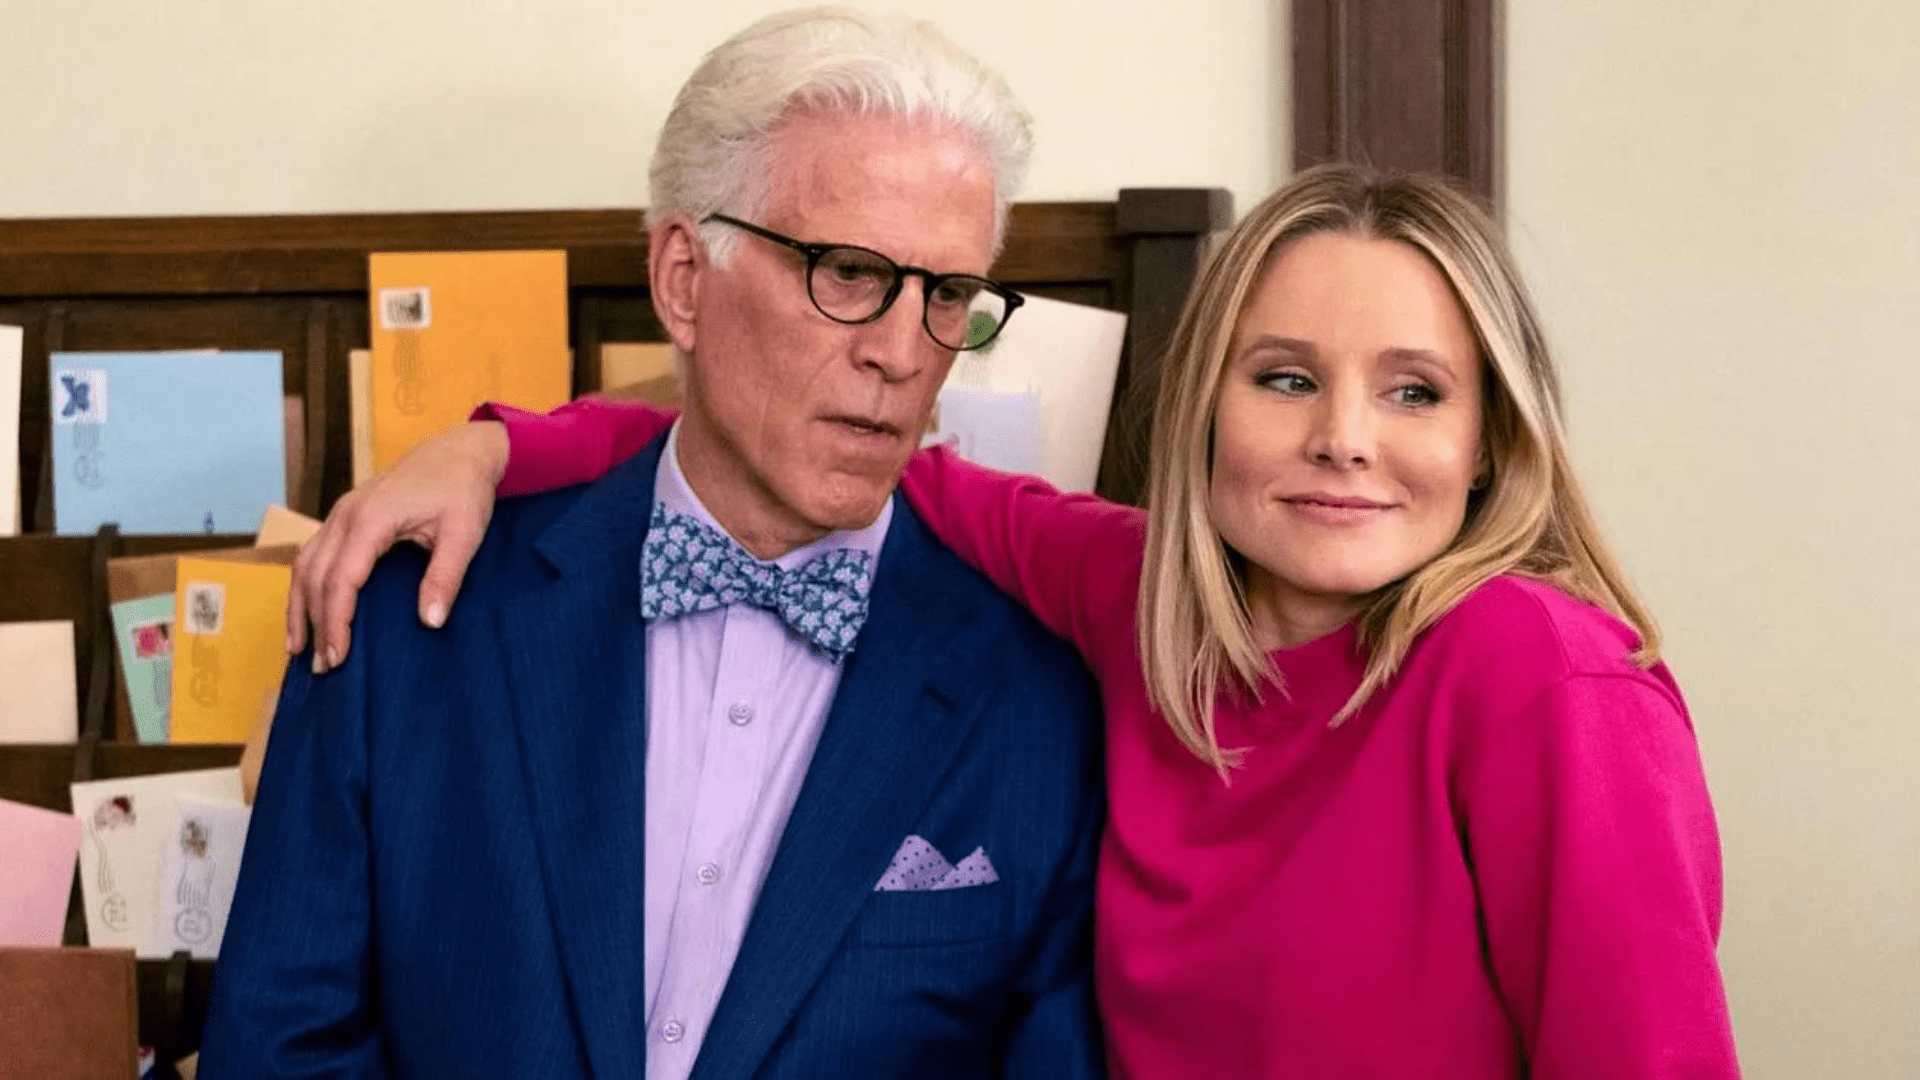 The Good Place Facts That Every Netflix Subscriber Should Know - The Good Place Facts